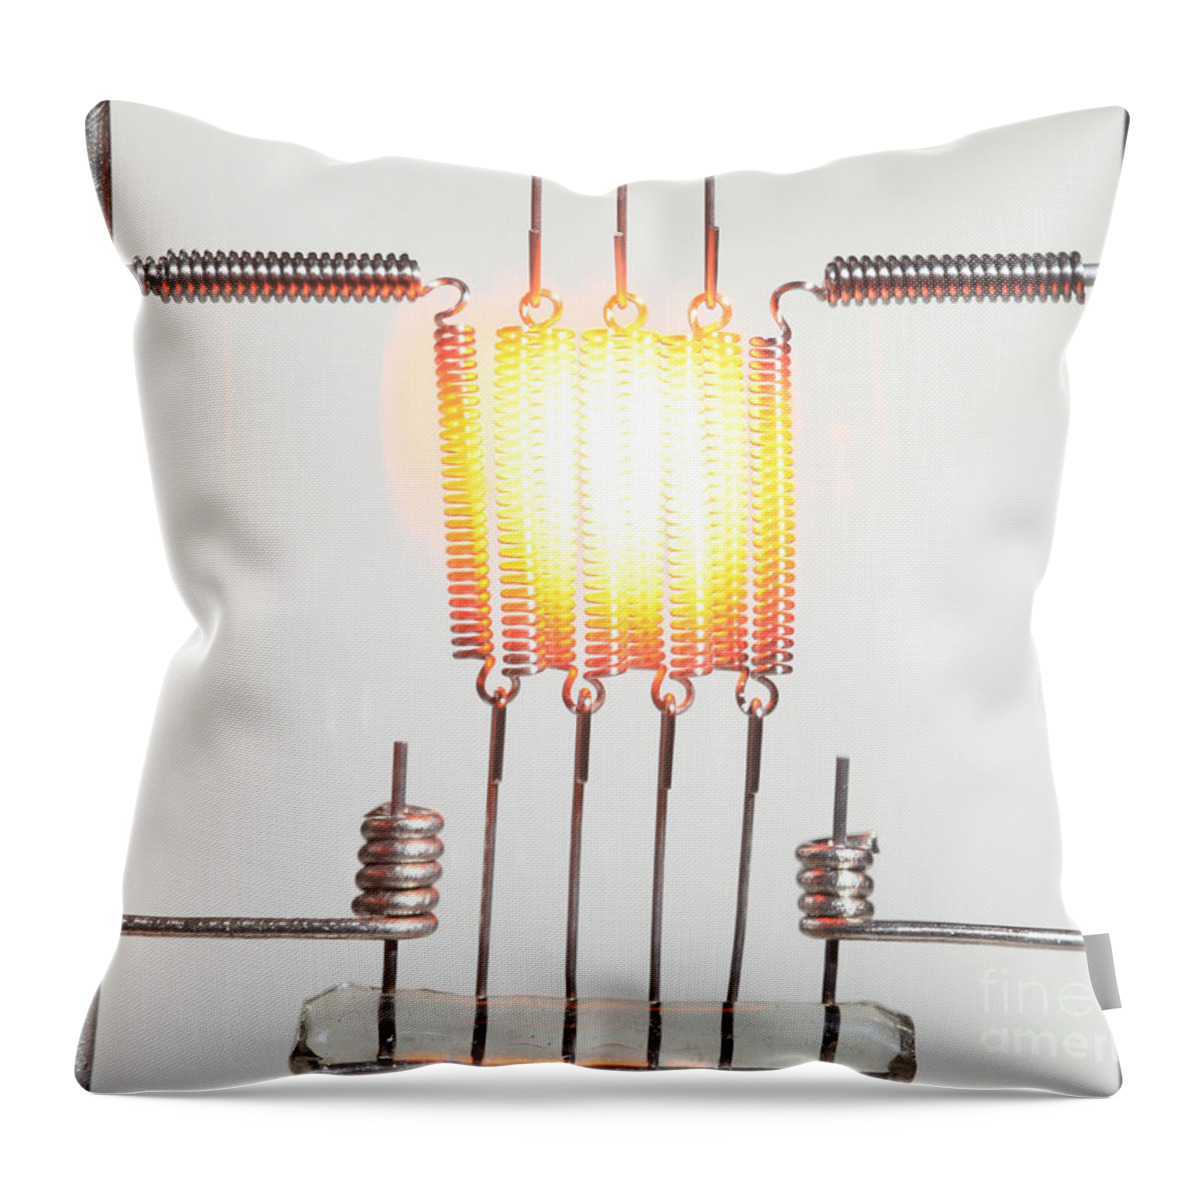 Science Throw Pillow featuring the photograph Glowing Filament 4 Of 4 by Ted Kinsman